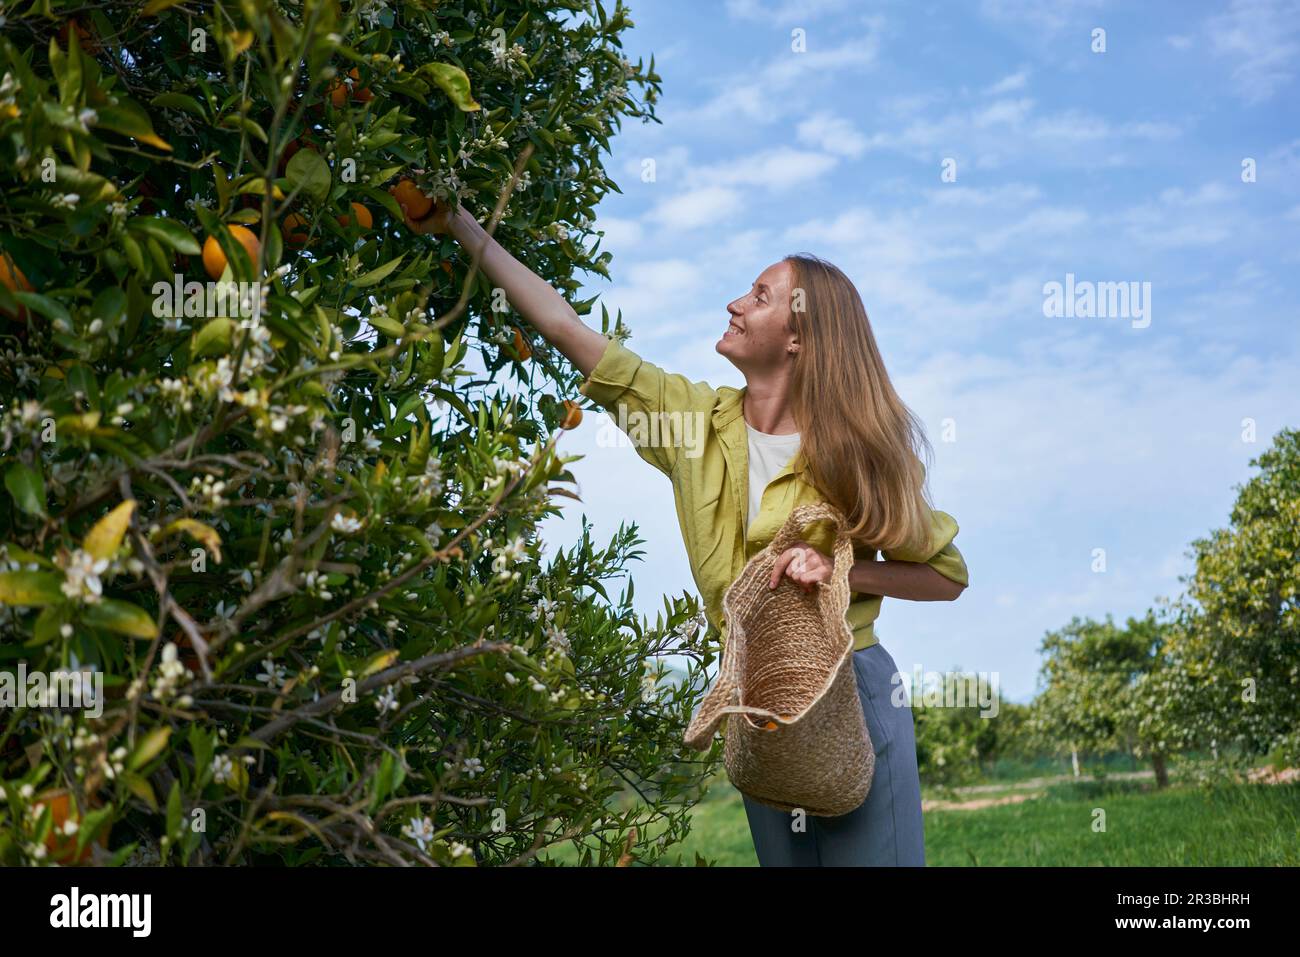 Young Beautiful Teen Girl 14-16 Year Old Posing In Apple Orchard. Wearing  White Elegant Dress. Summer Time. Stock Photo, Picture and Royalty Free  Image. Image 77590954.